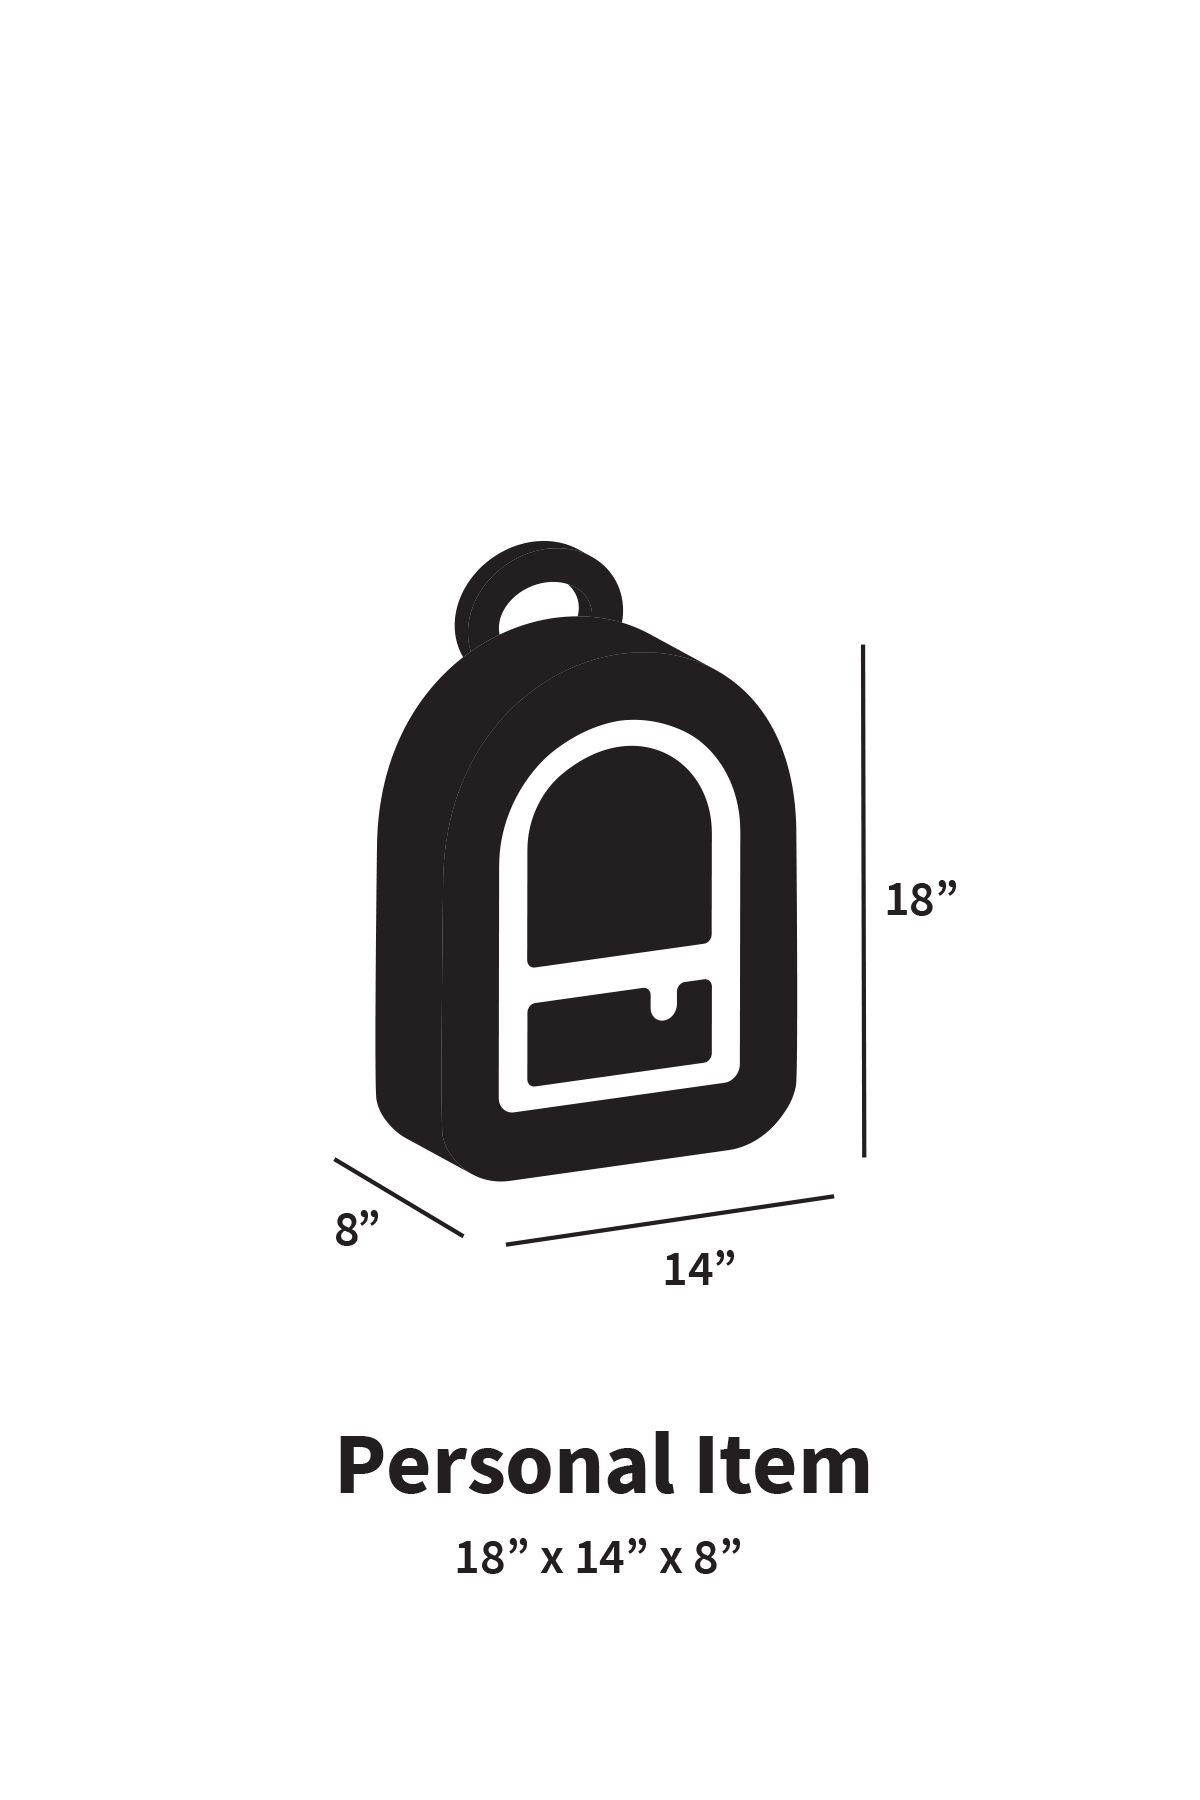 What are the size and weight limits for bags? · Spirit Support